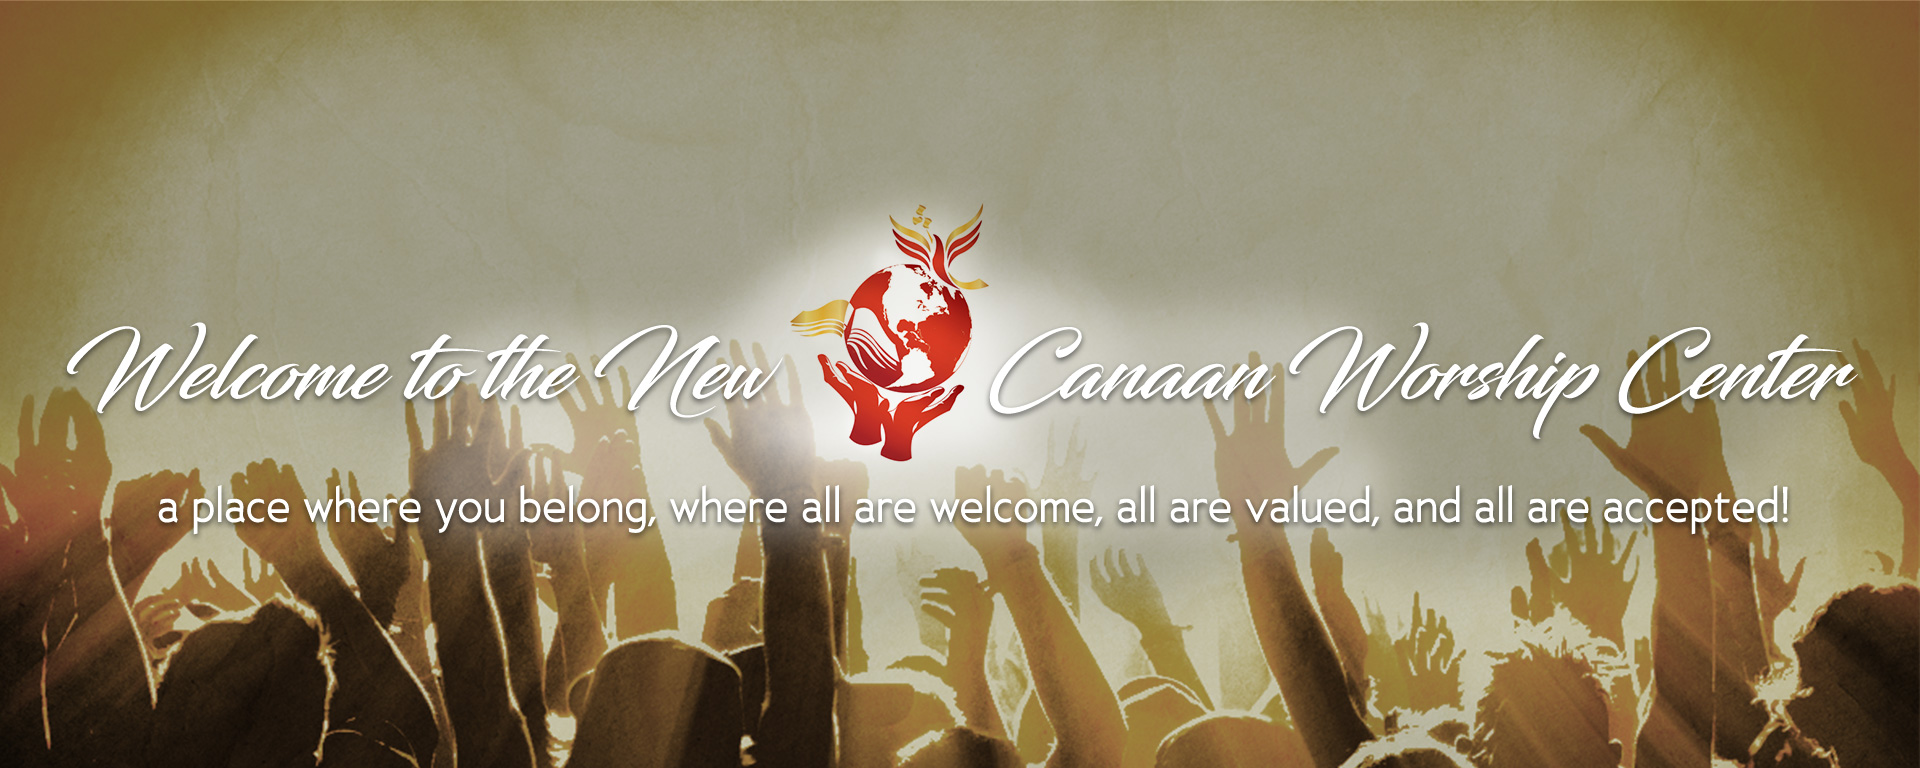 Welcome to the New Canaan Worship Center a place where you belong, where all are welcome, all are valued, and all are accepted!